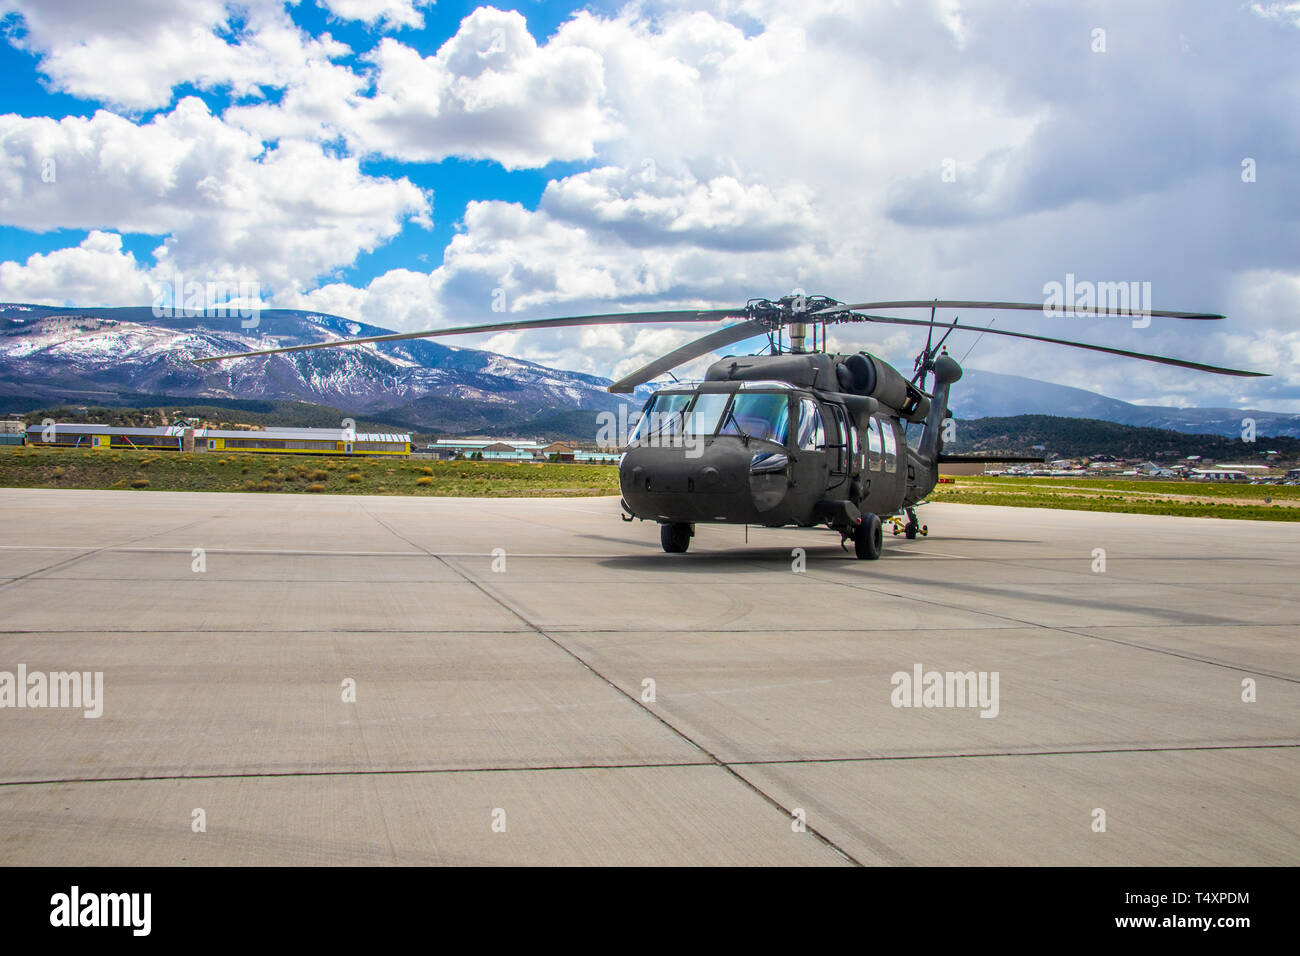 A UH-60 Blackhawk is towed back into storage at the High Altitude Army National Guard Aviation Training Site, Gypsum, Colo., April 17, 2019. 20 percent of HAATS students come from another branch of service or a foreign countries military. HAATS trains rotary wing aviators about power management in various airframes. (U.S. Army photo by Spc. Michael Hunnisett) Stock Photo